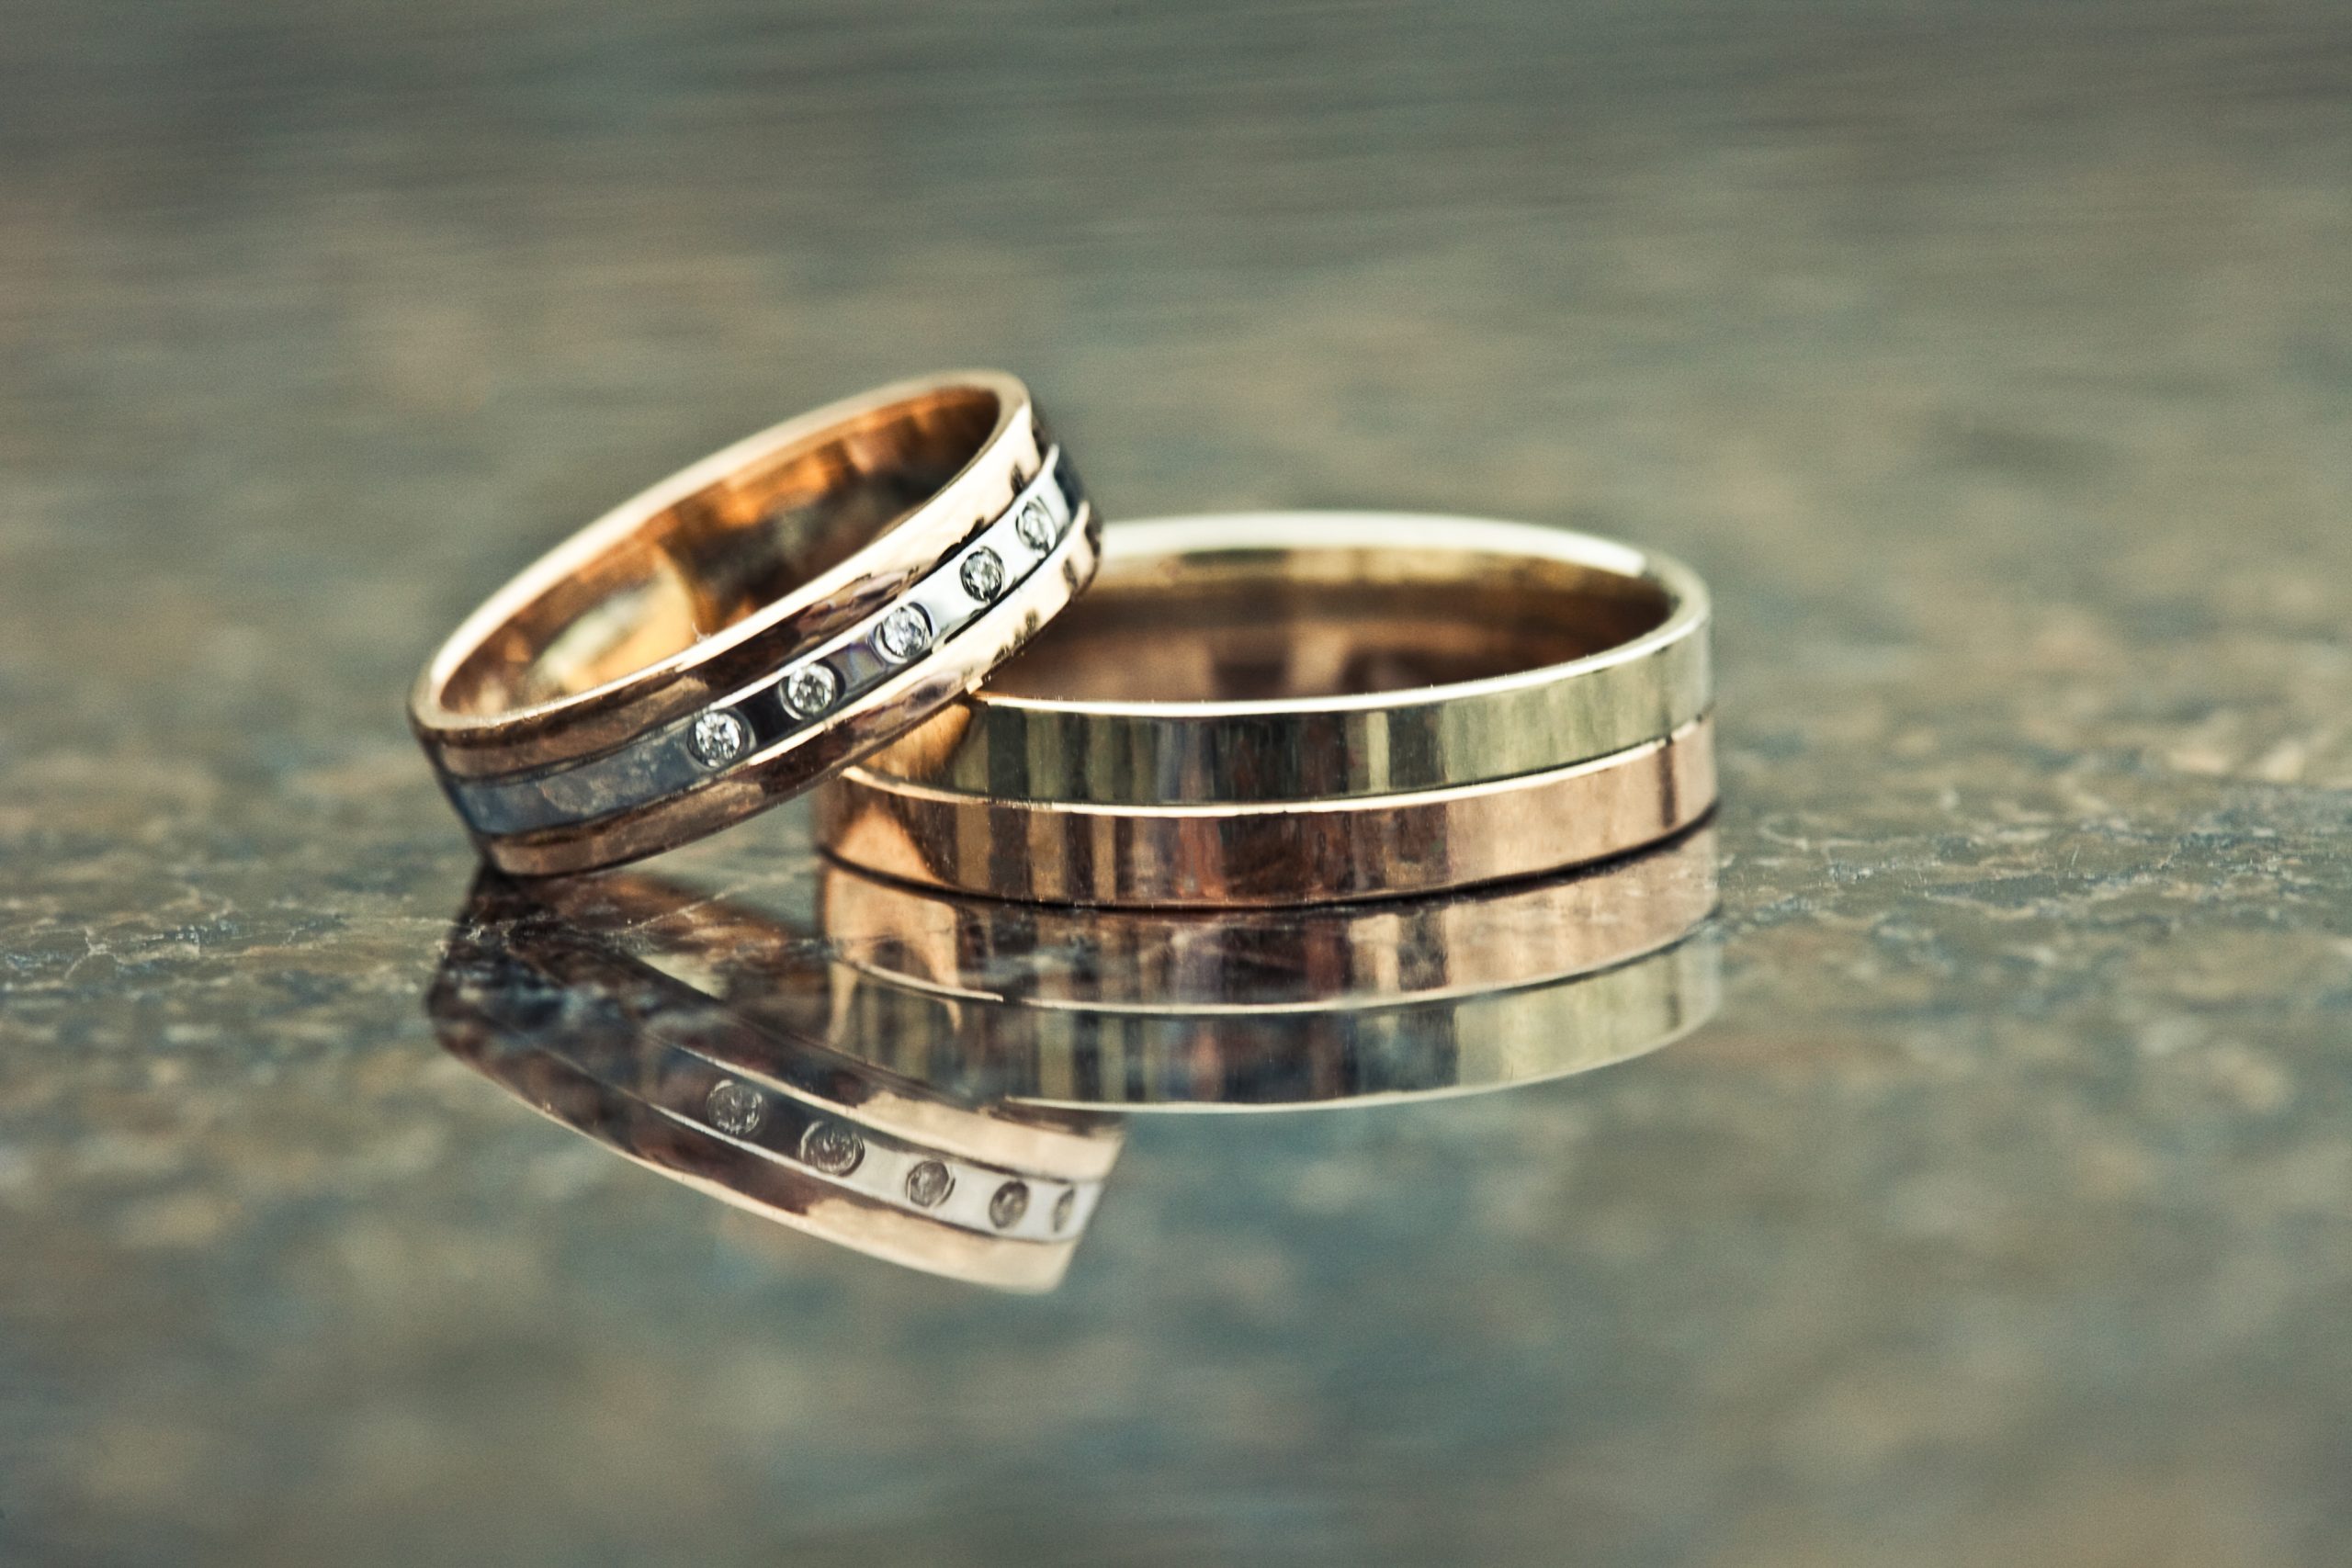 Two gold wedding rings of white and yellow gold